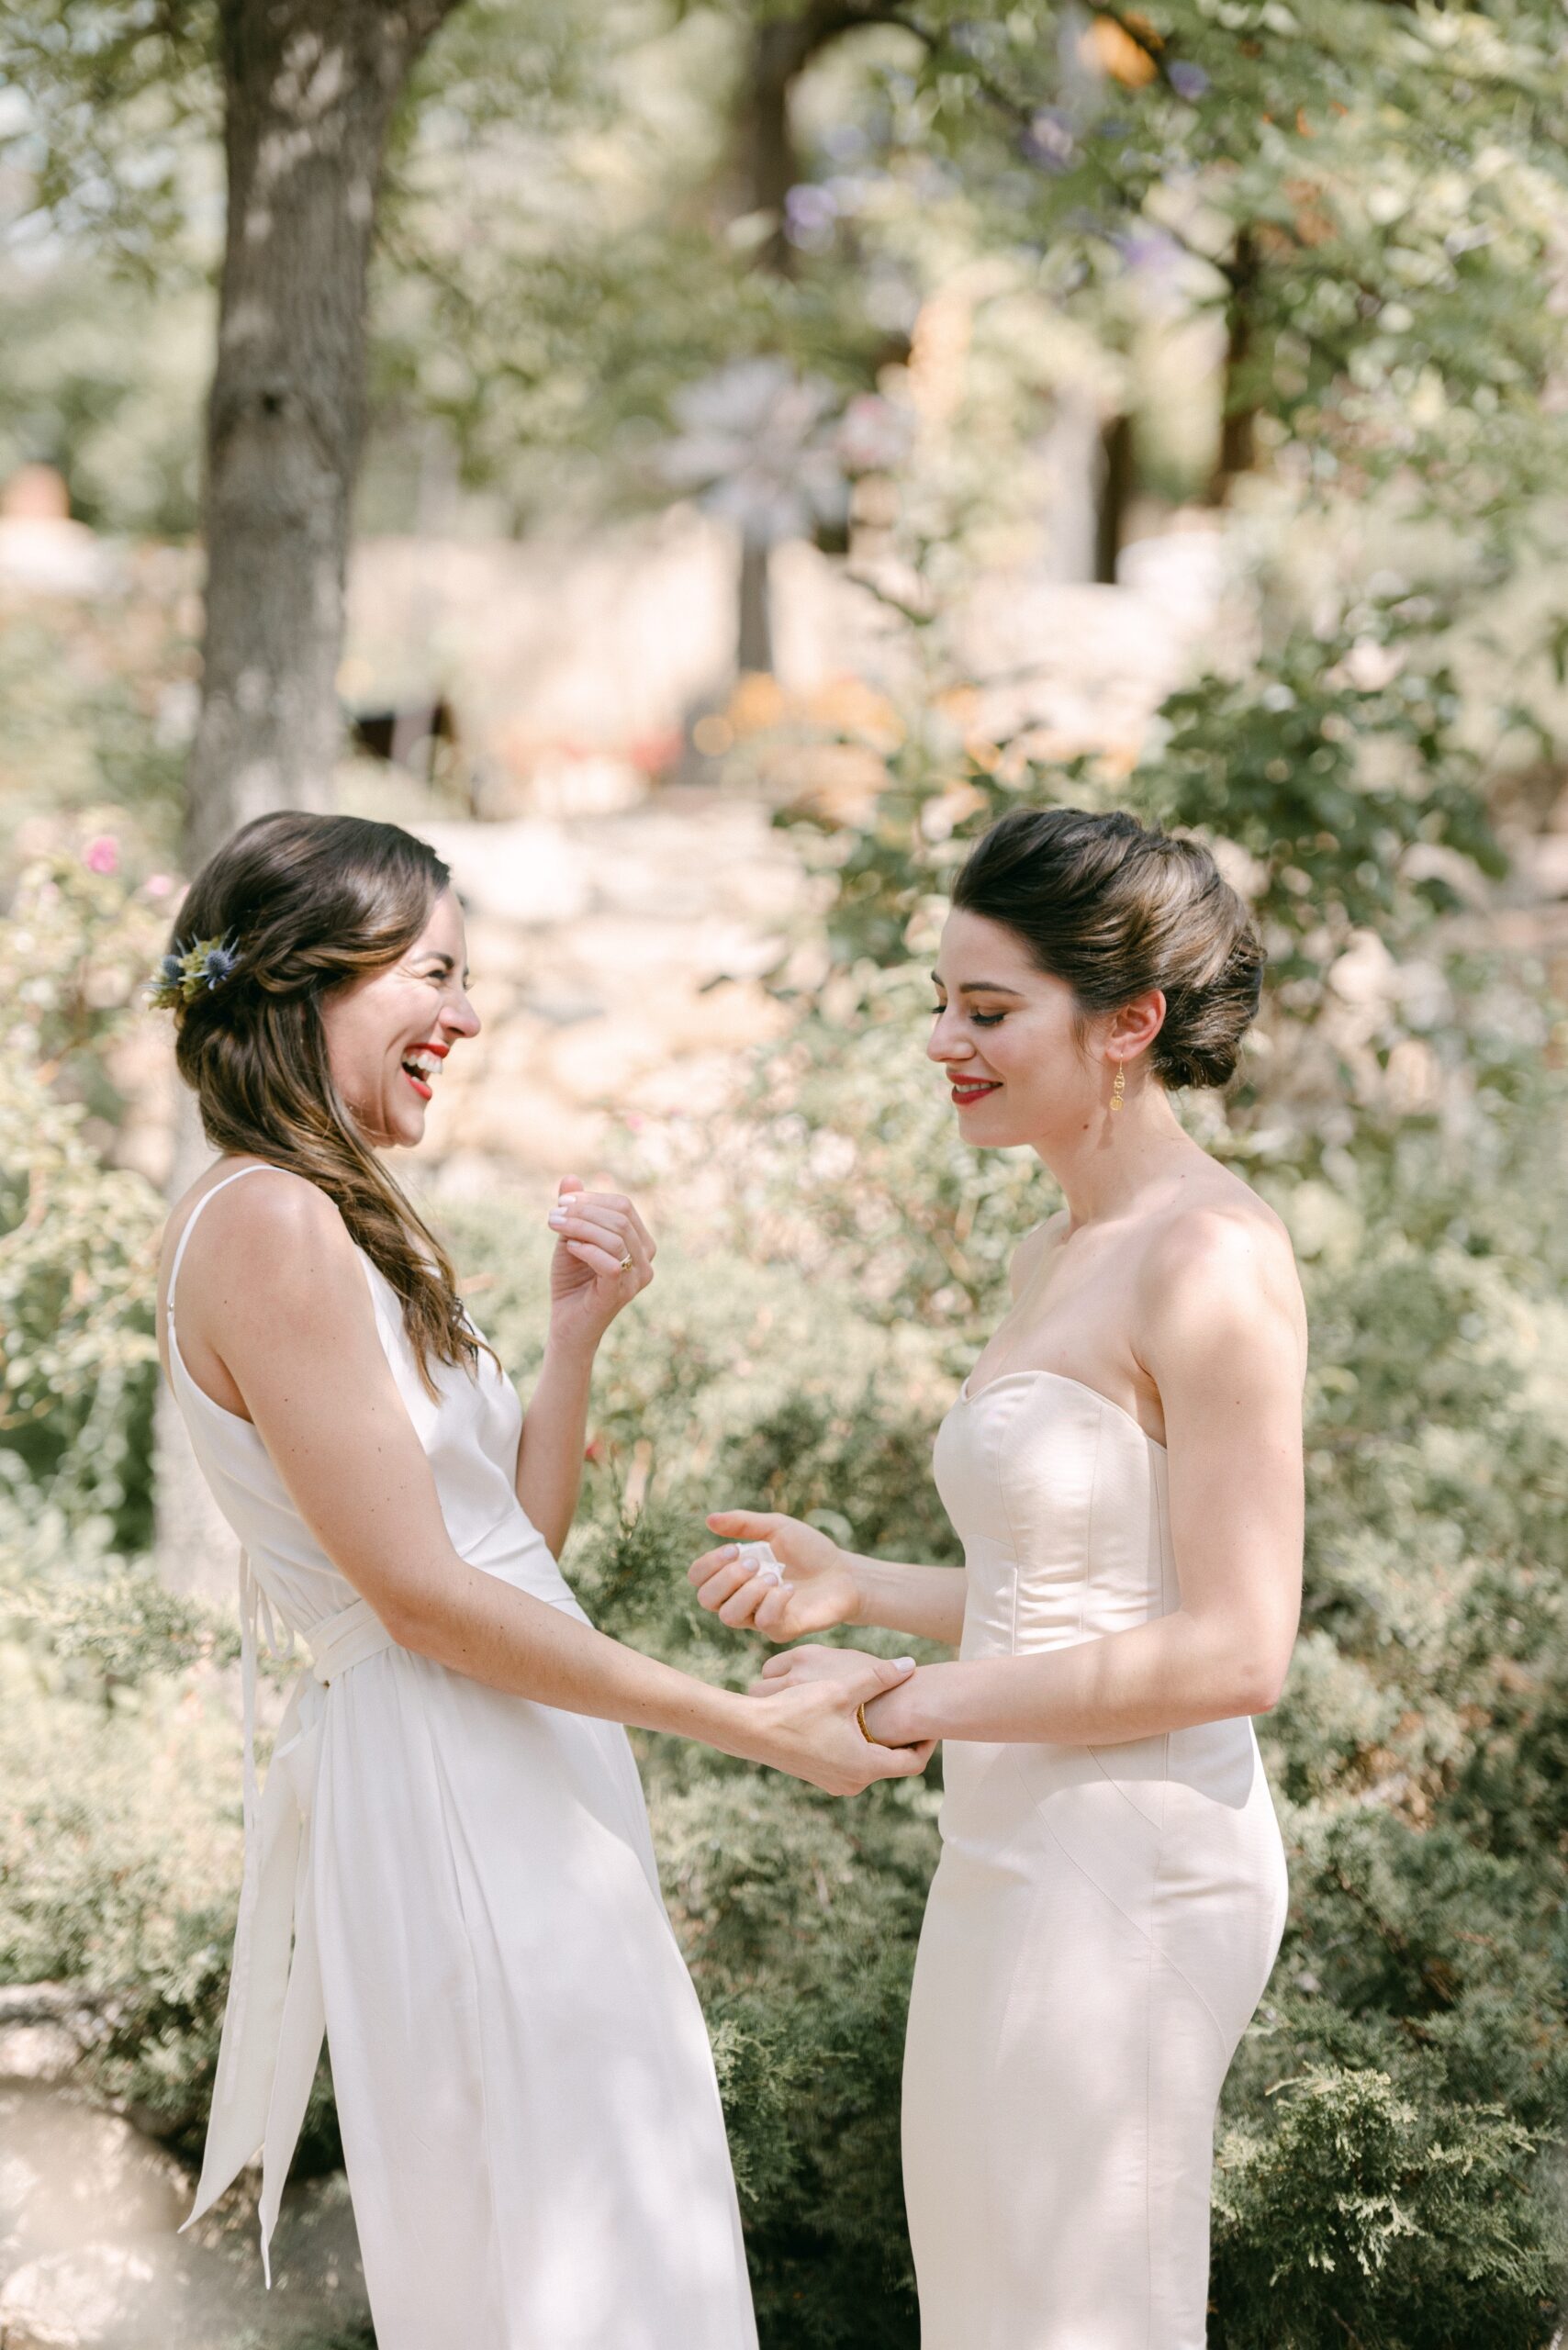 Photos of a Santa Fe elopement that took place at Inn of the Turquoise Bear in the heart of Santa Fe, New Mexico. Photo by Colorado wedding photographer, Ashley Joyce.